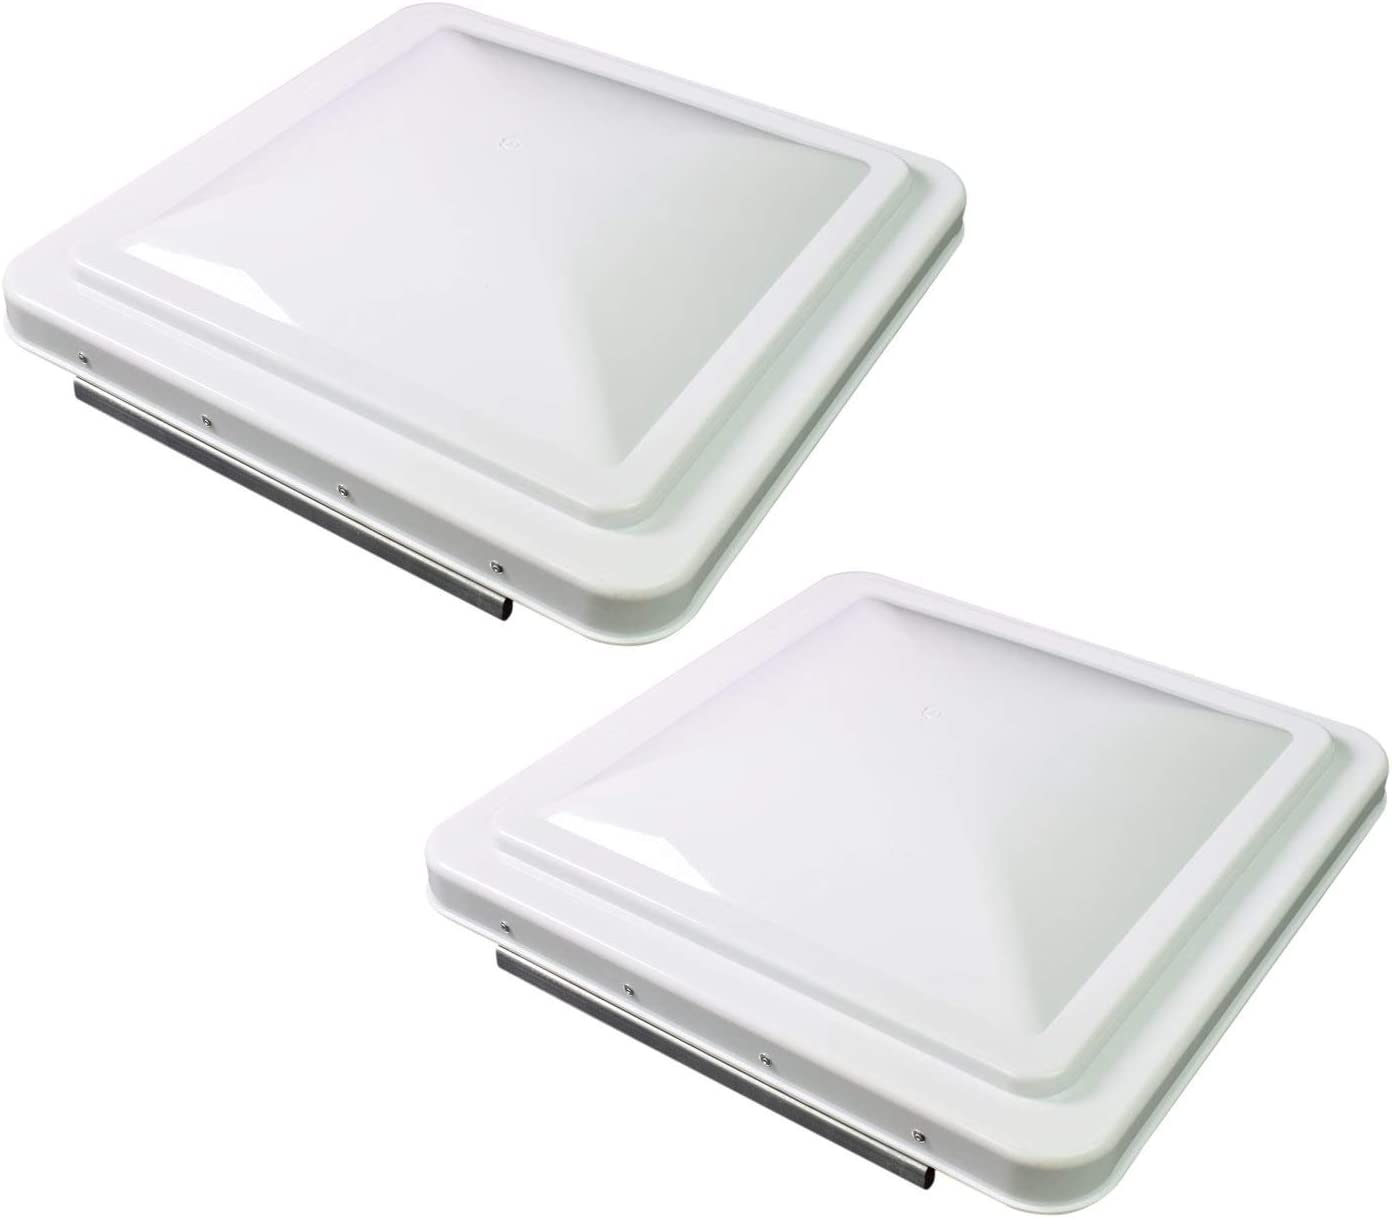 RV Roof Vent Lid Cover Universal Replacement, 14" White Compatible with Camper Trailer, Motorhome - 2 Pack